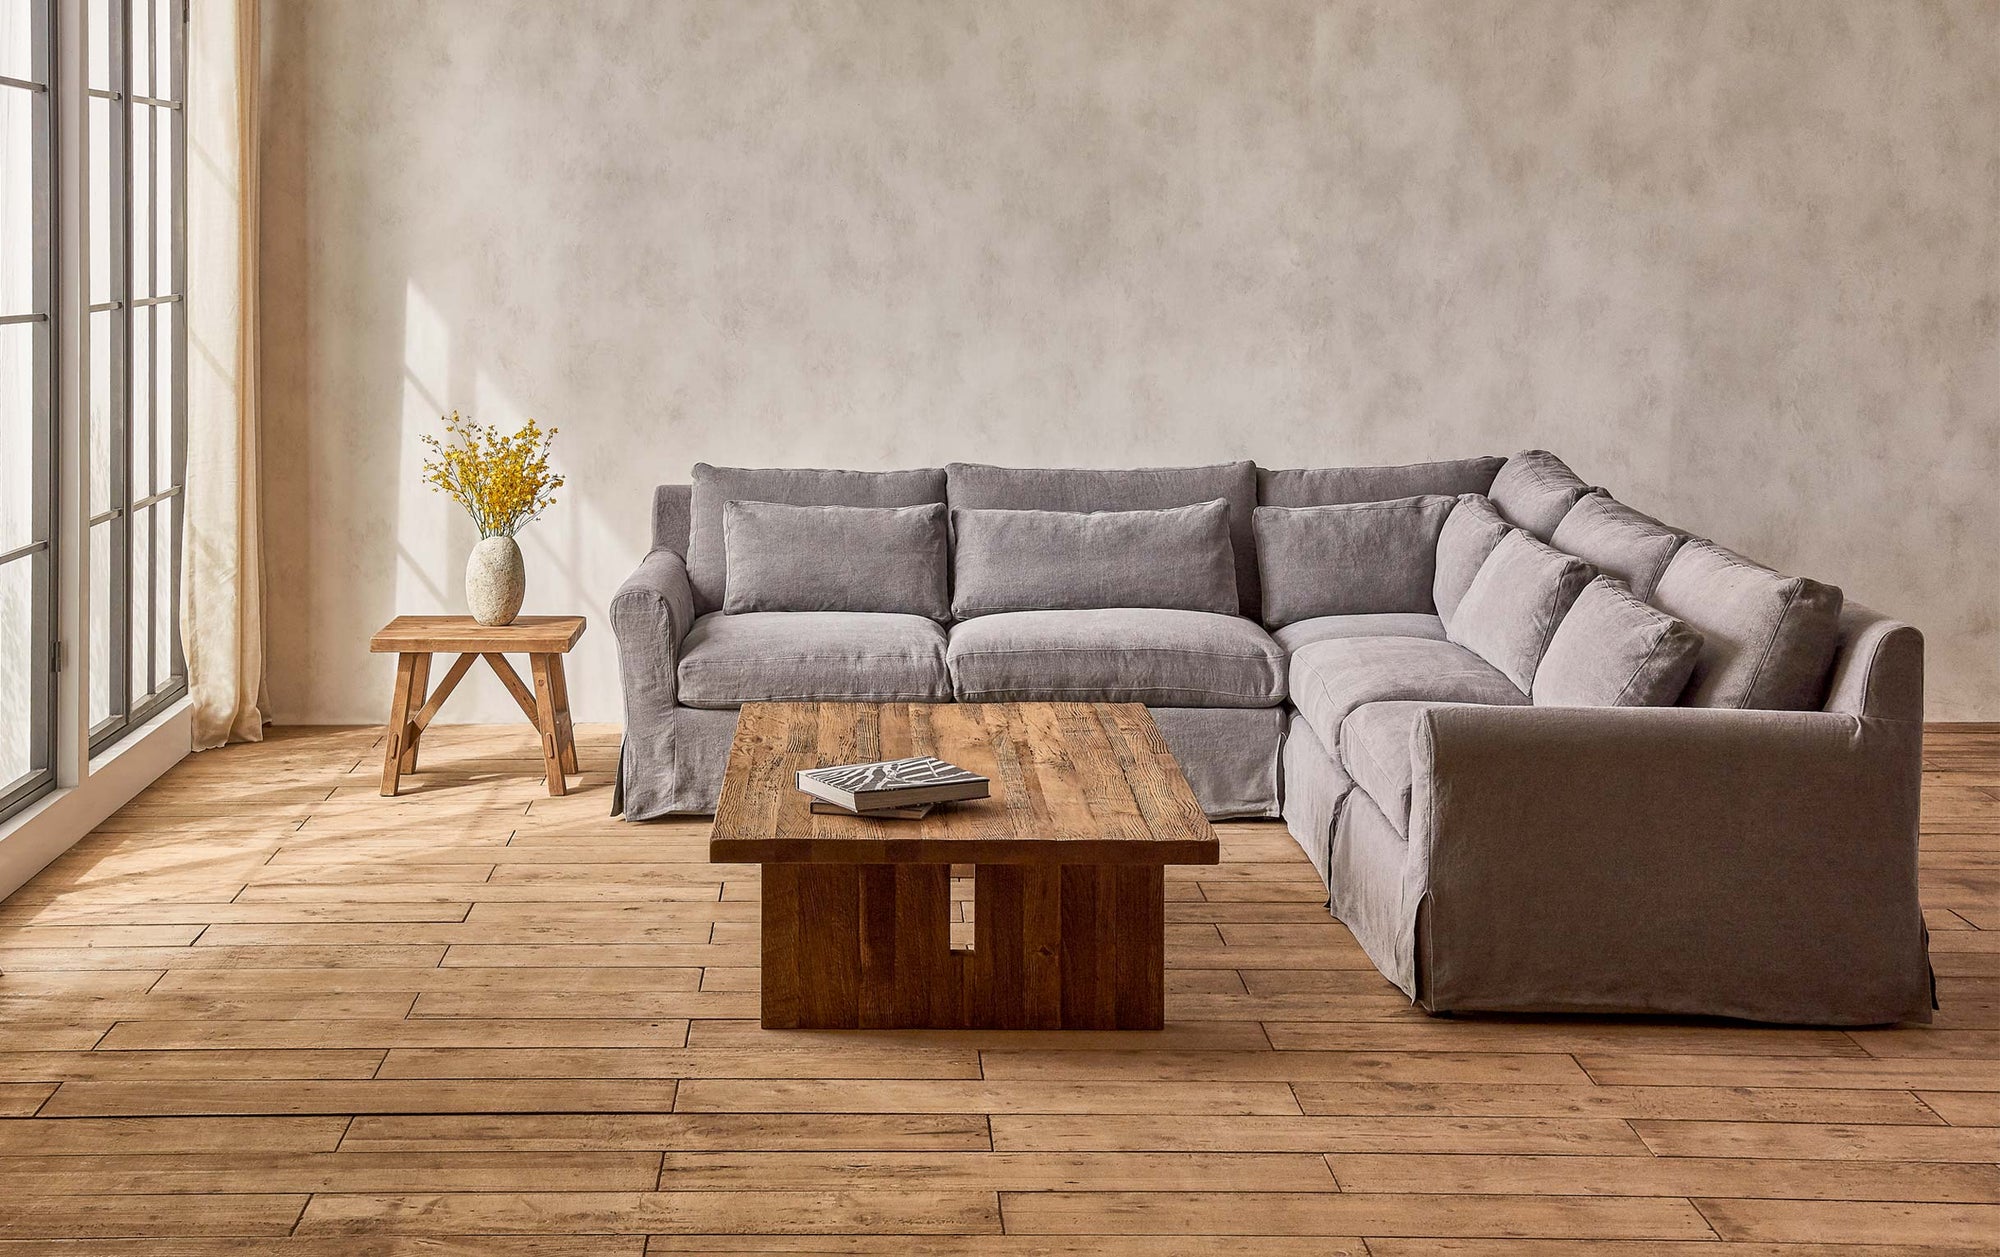 Elias Corner Sectional Sofa in Ink Cap, a medium cool grey Light Weight Linen, placed in a sunlit room with the Kai Coffee Table